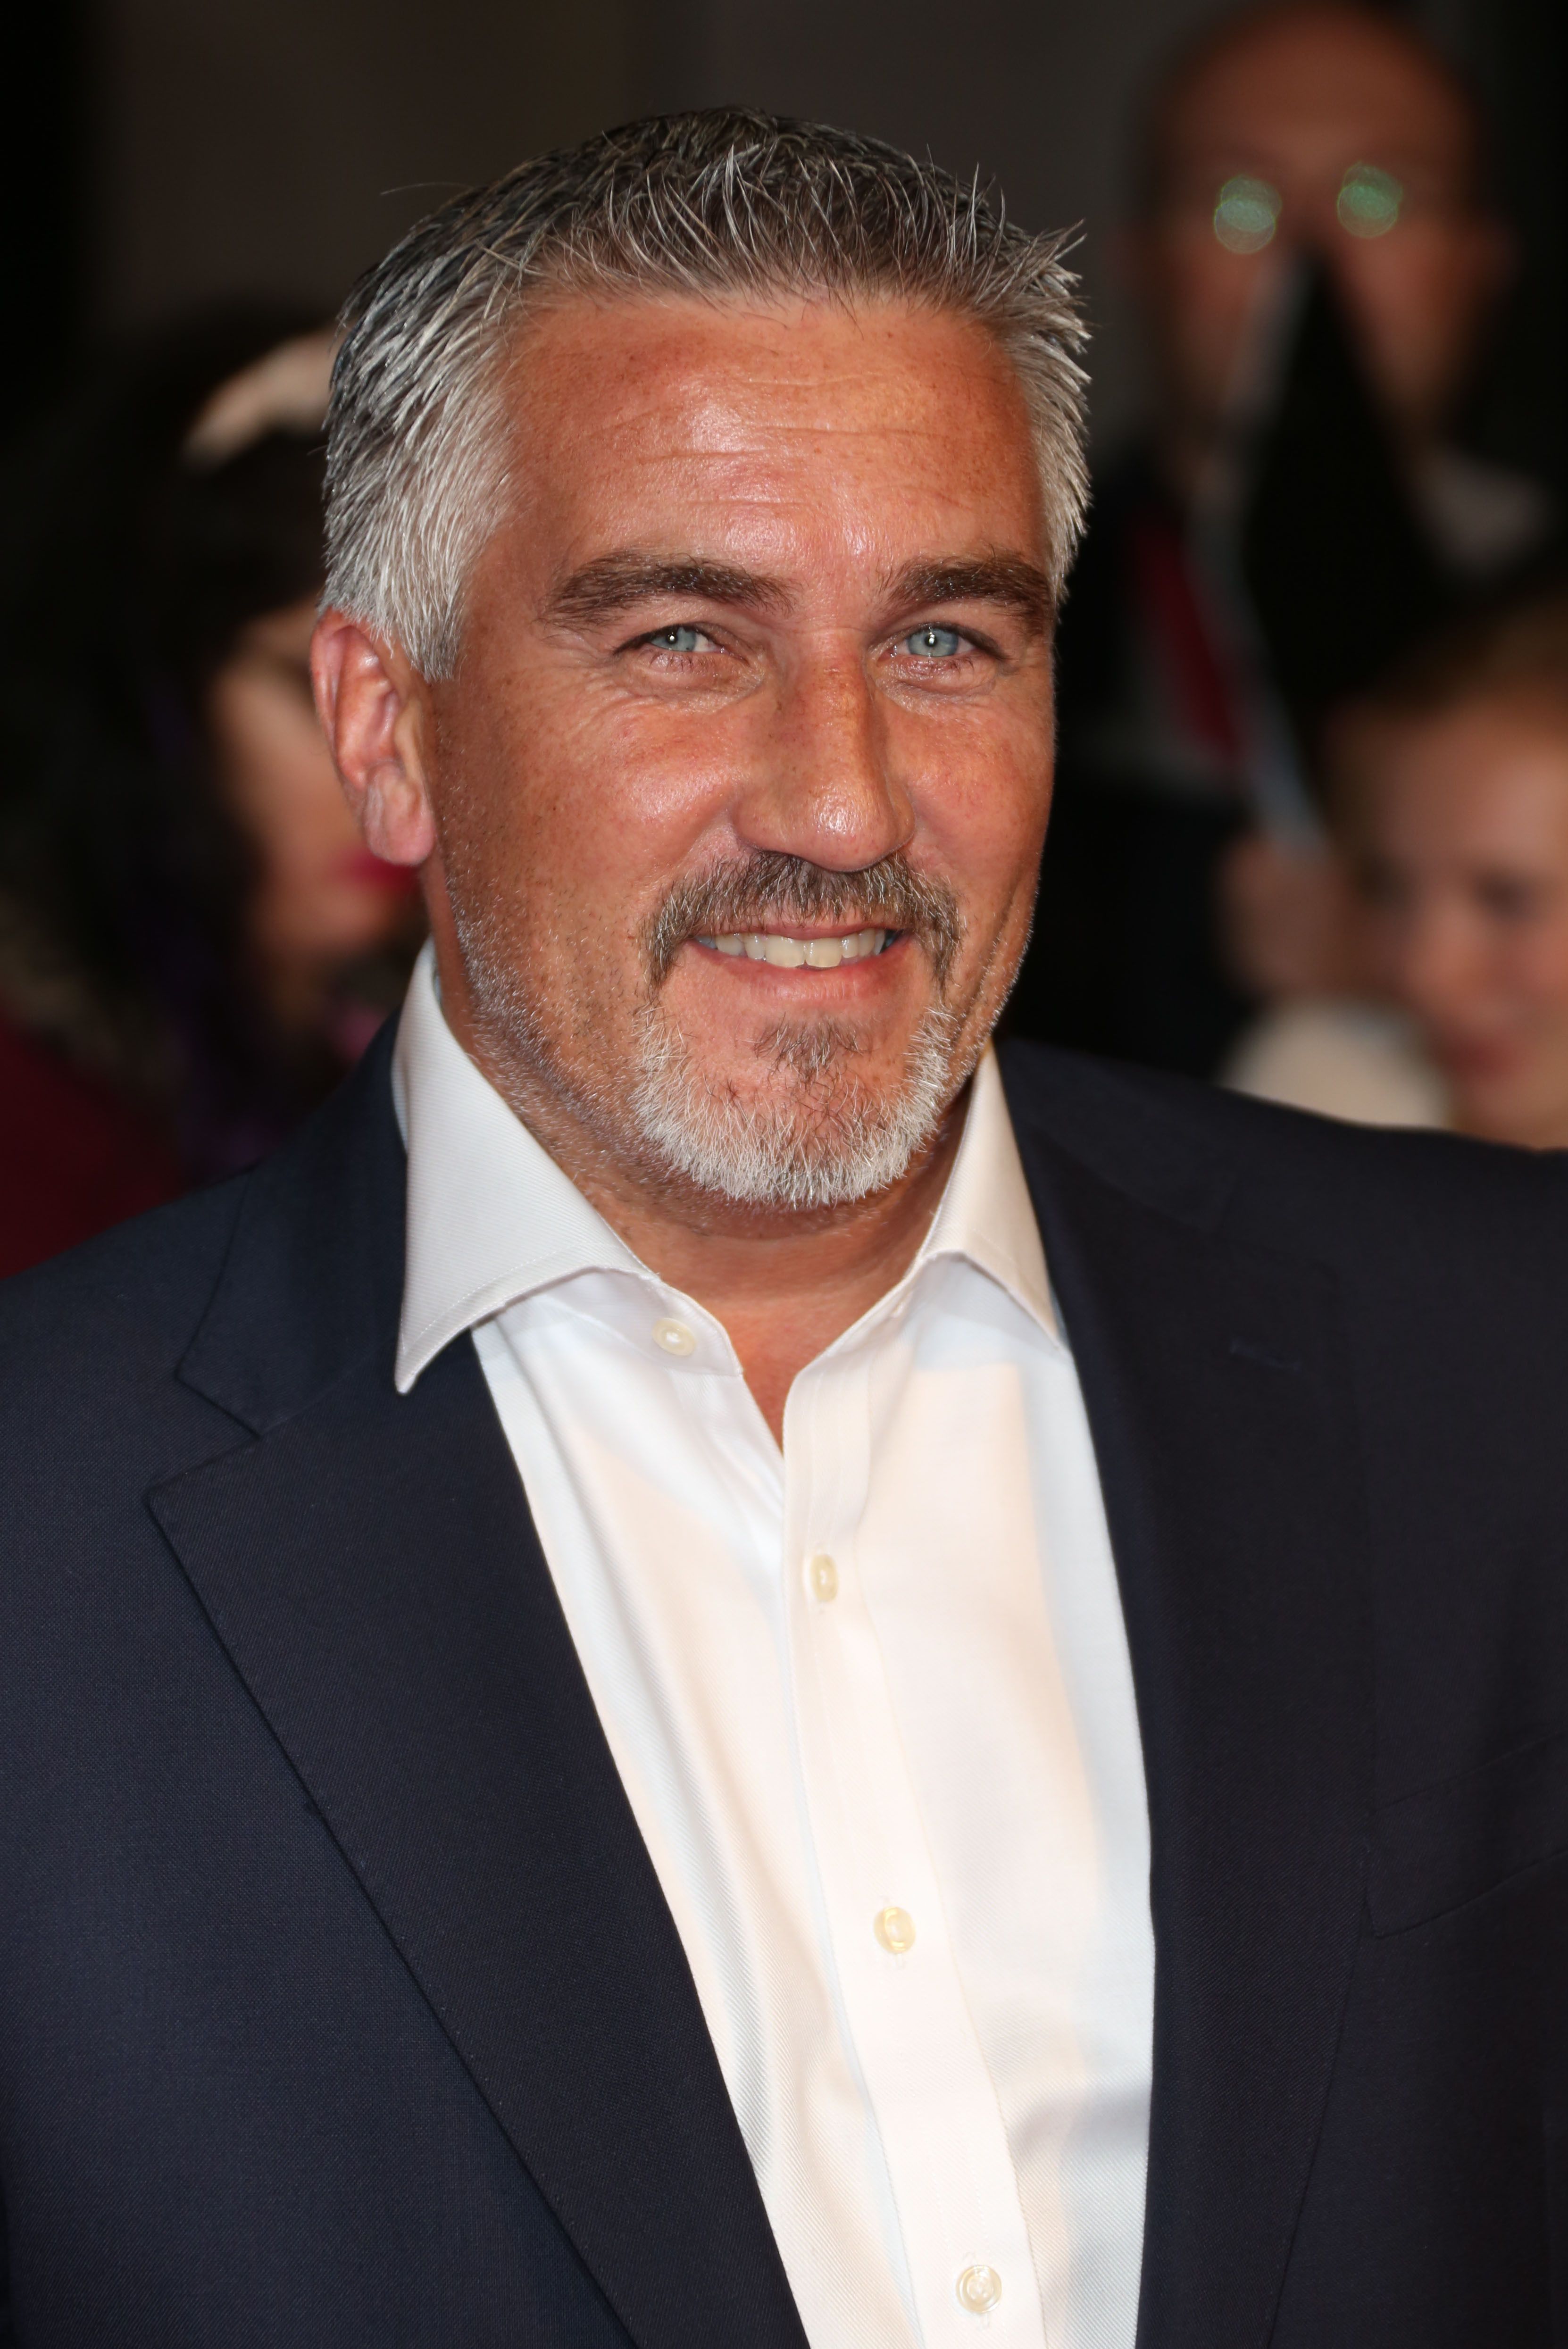 Paul Hollywood smiles in a navy blue suit.